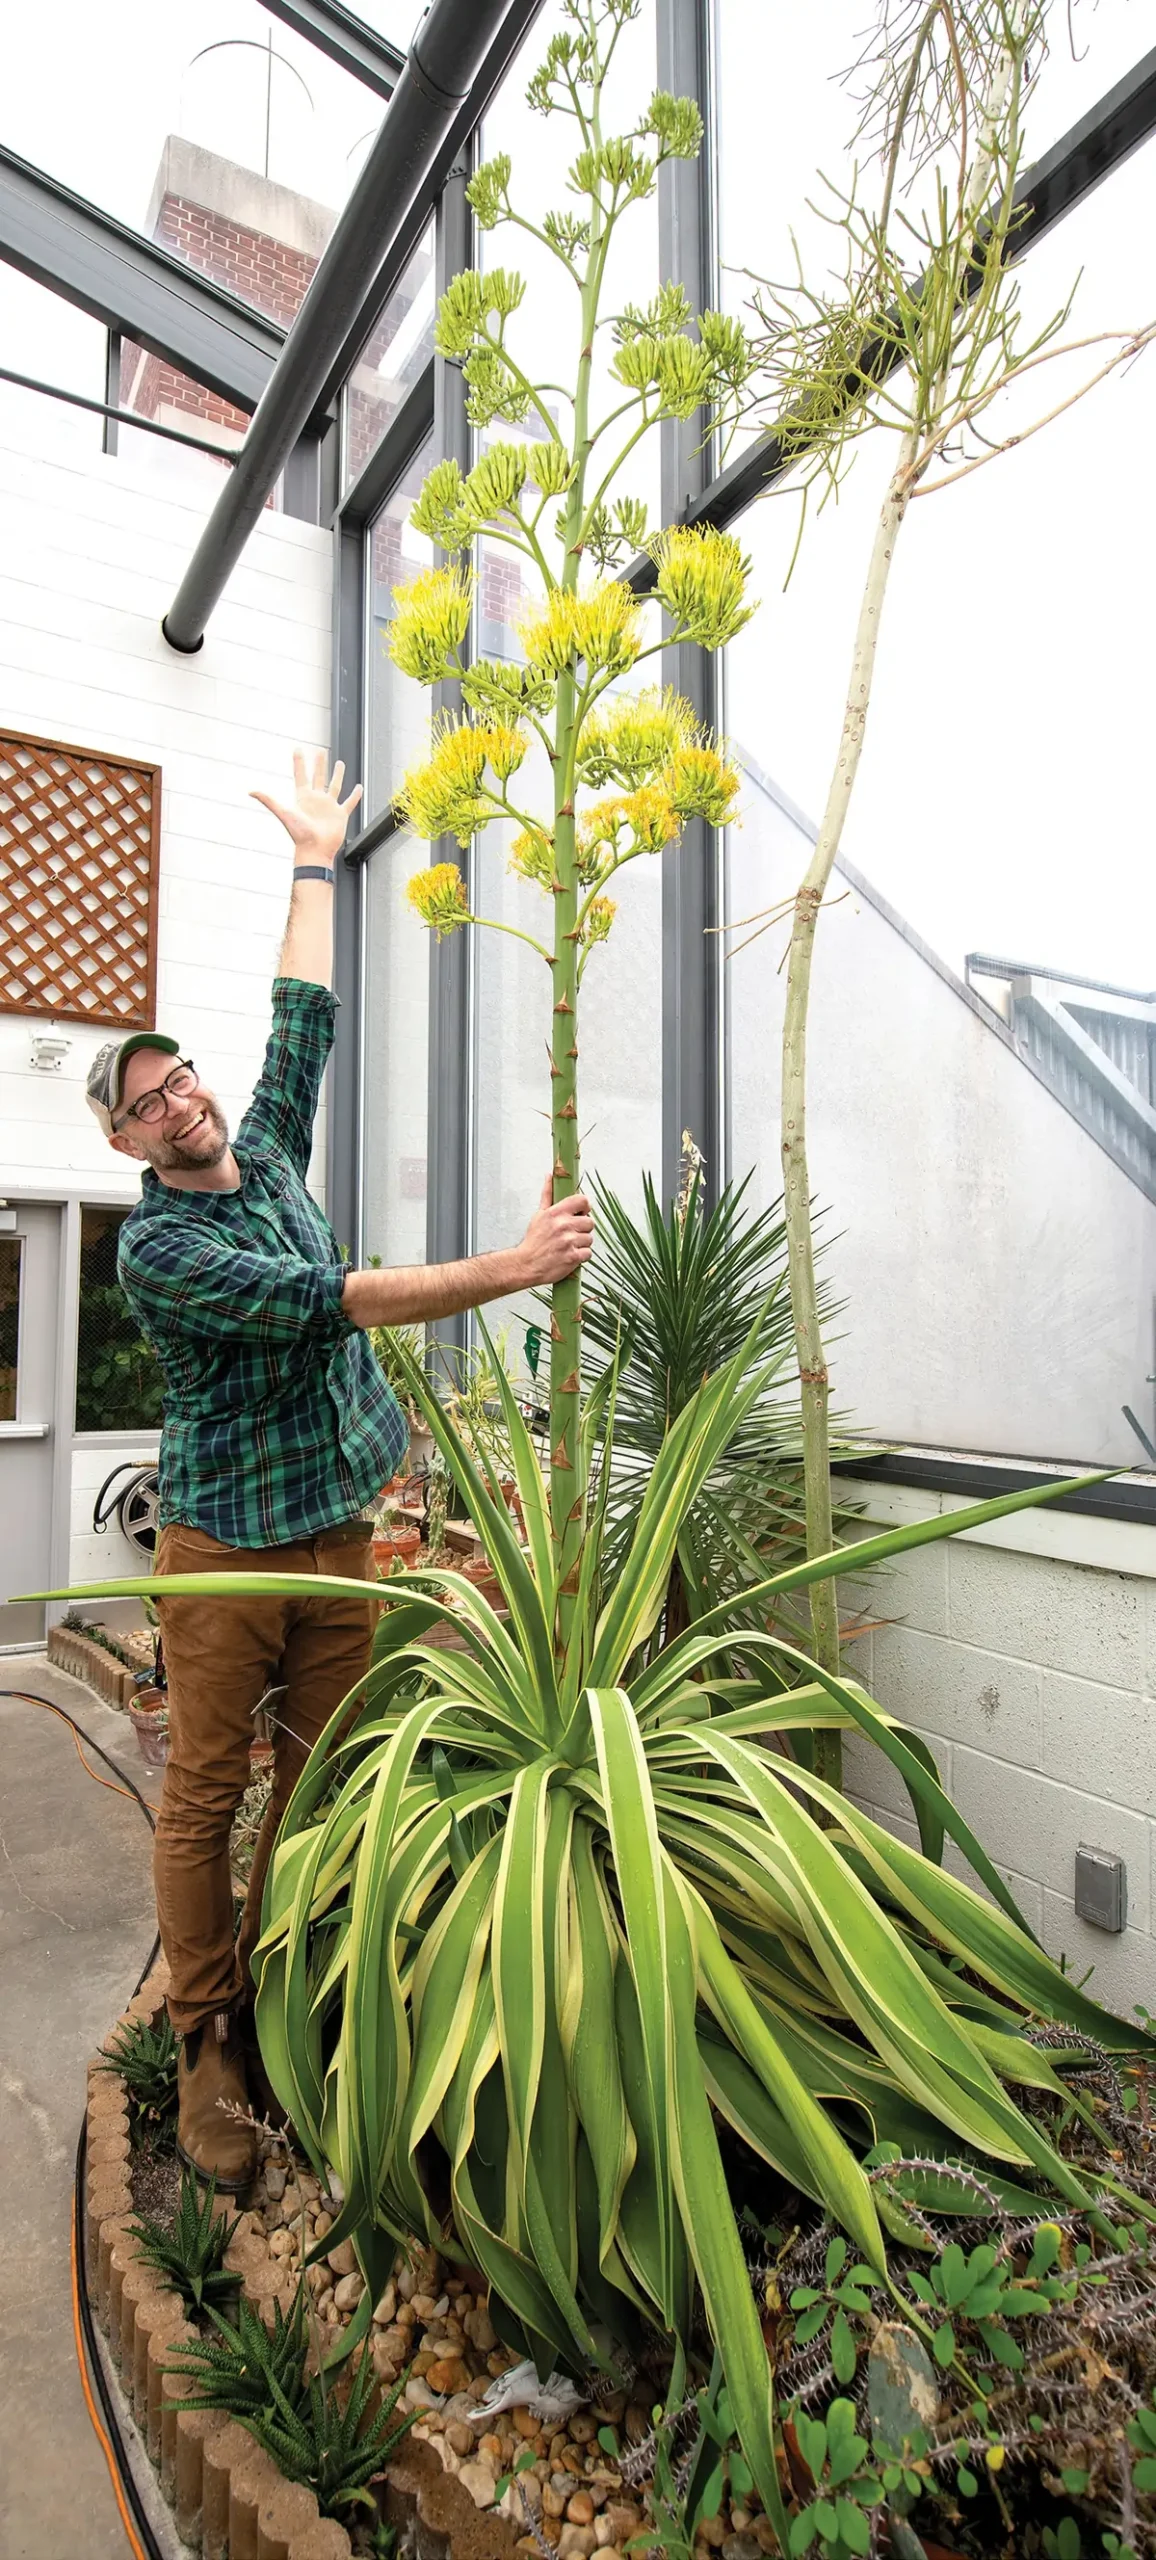 A marvel of nature, Bucknell’s century plant attracted many admirers, including Professor Chris Martine.